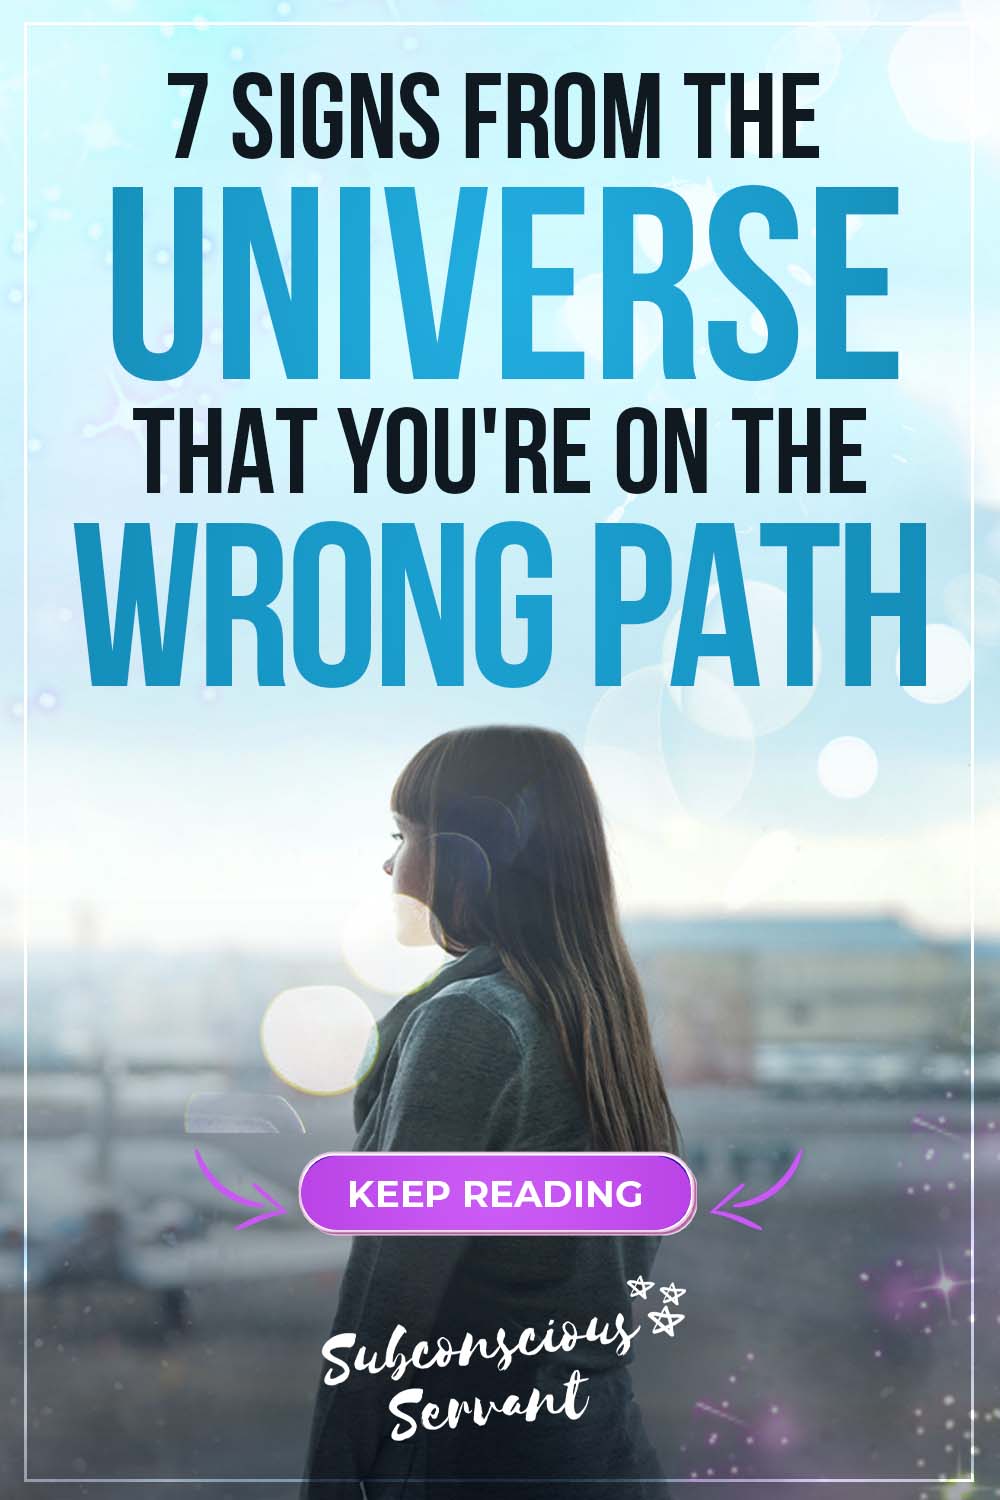 7 Warning Signs From the Universe That You\'re on the WRONG Path